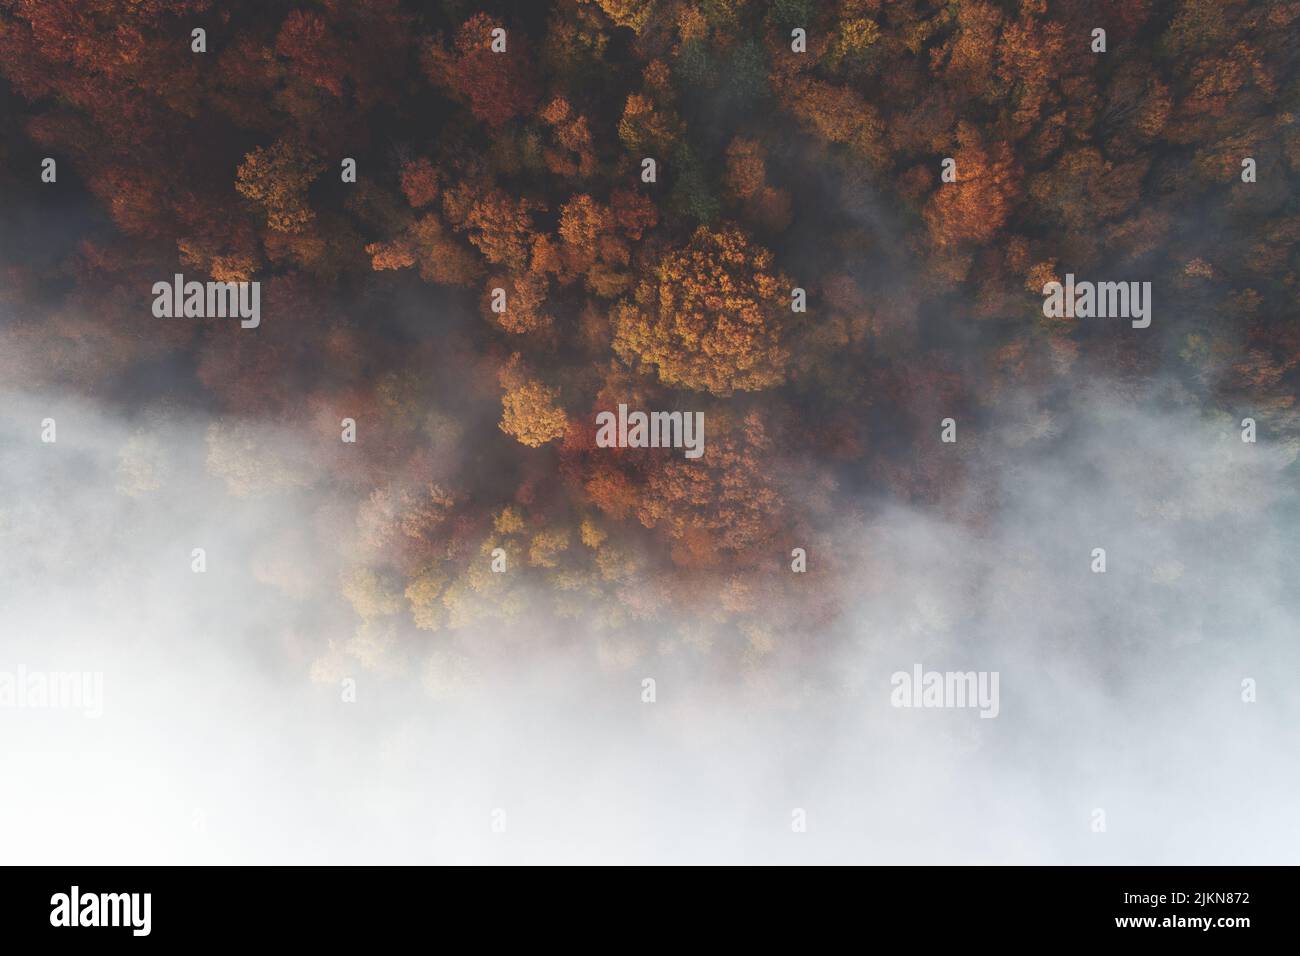 A drone aerial shot of landscape view of colorful autumn forest with fog around in the forest Stock Photo